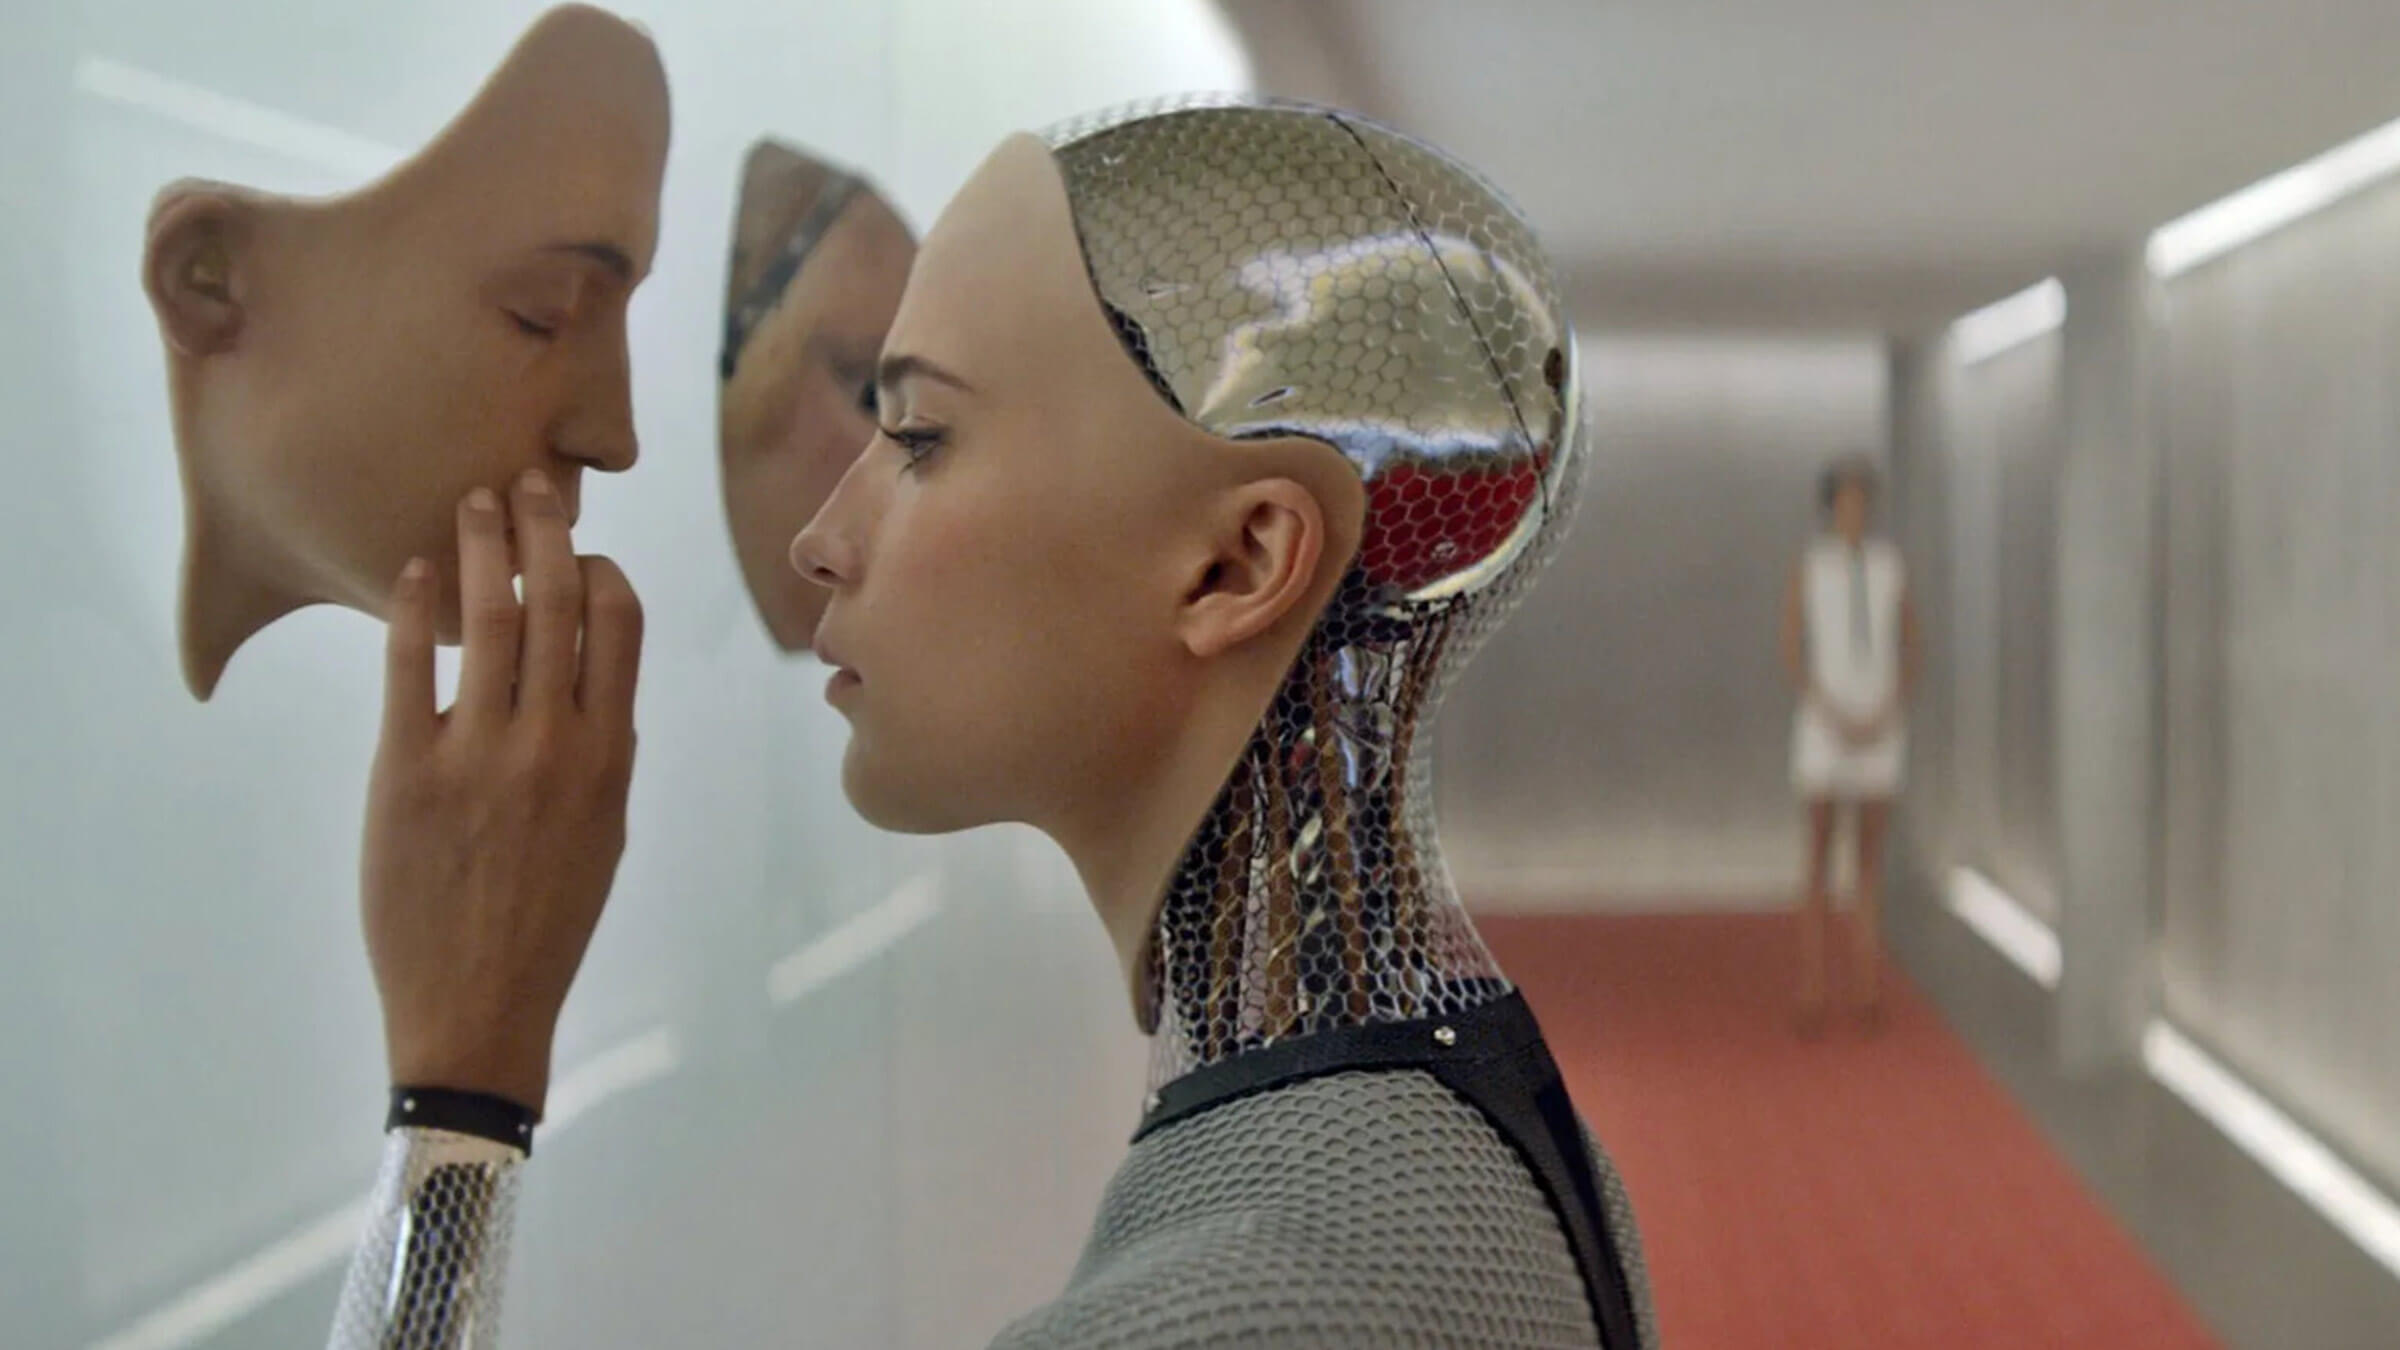 Robot Movies: A Mechanism for Discussing Humanity